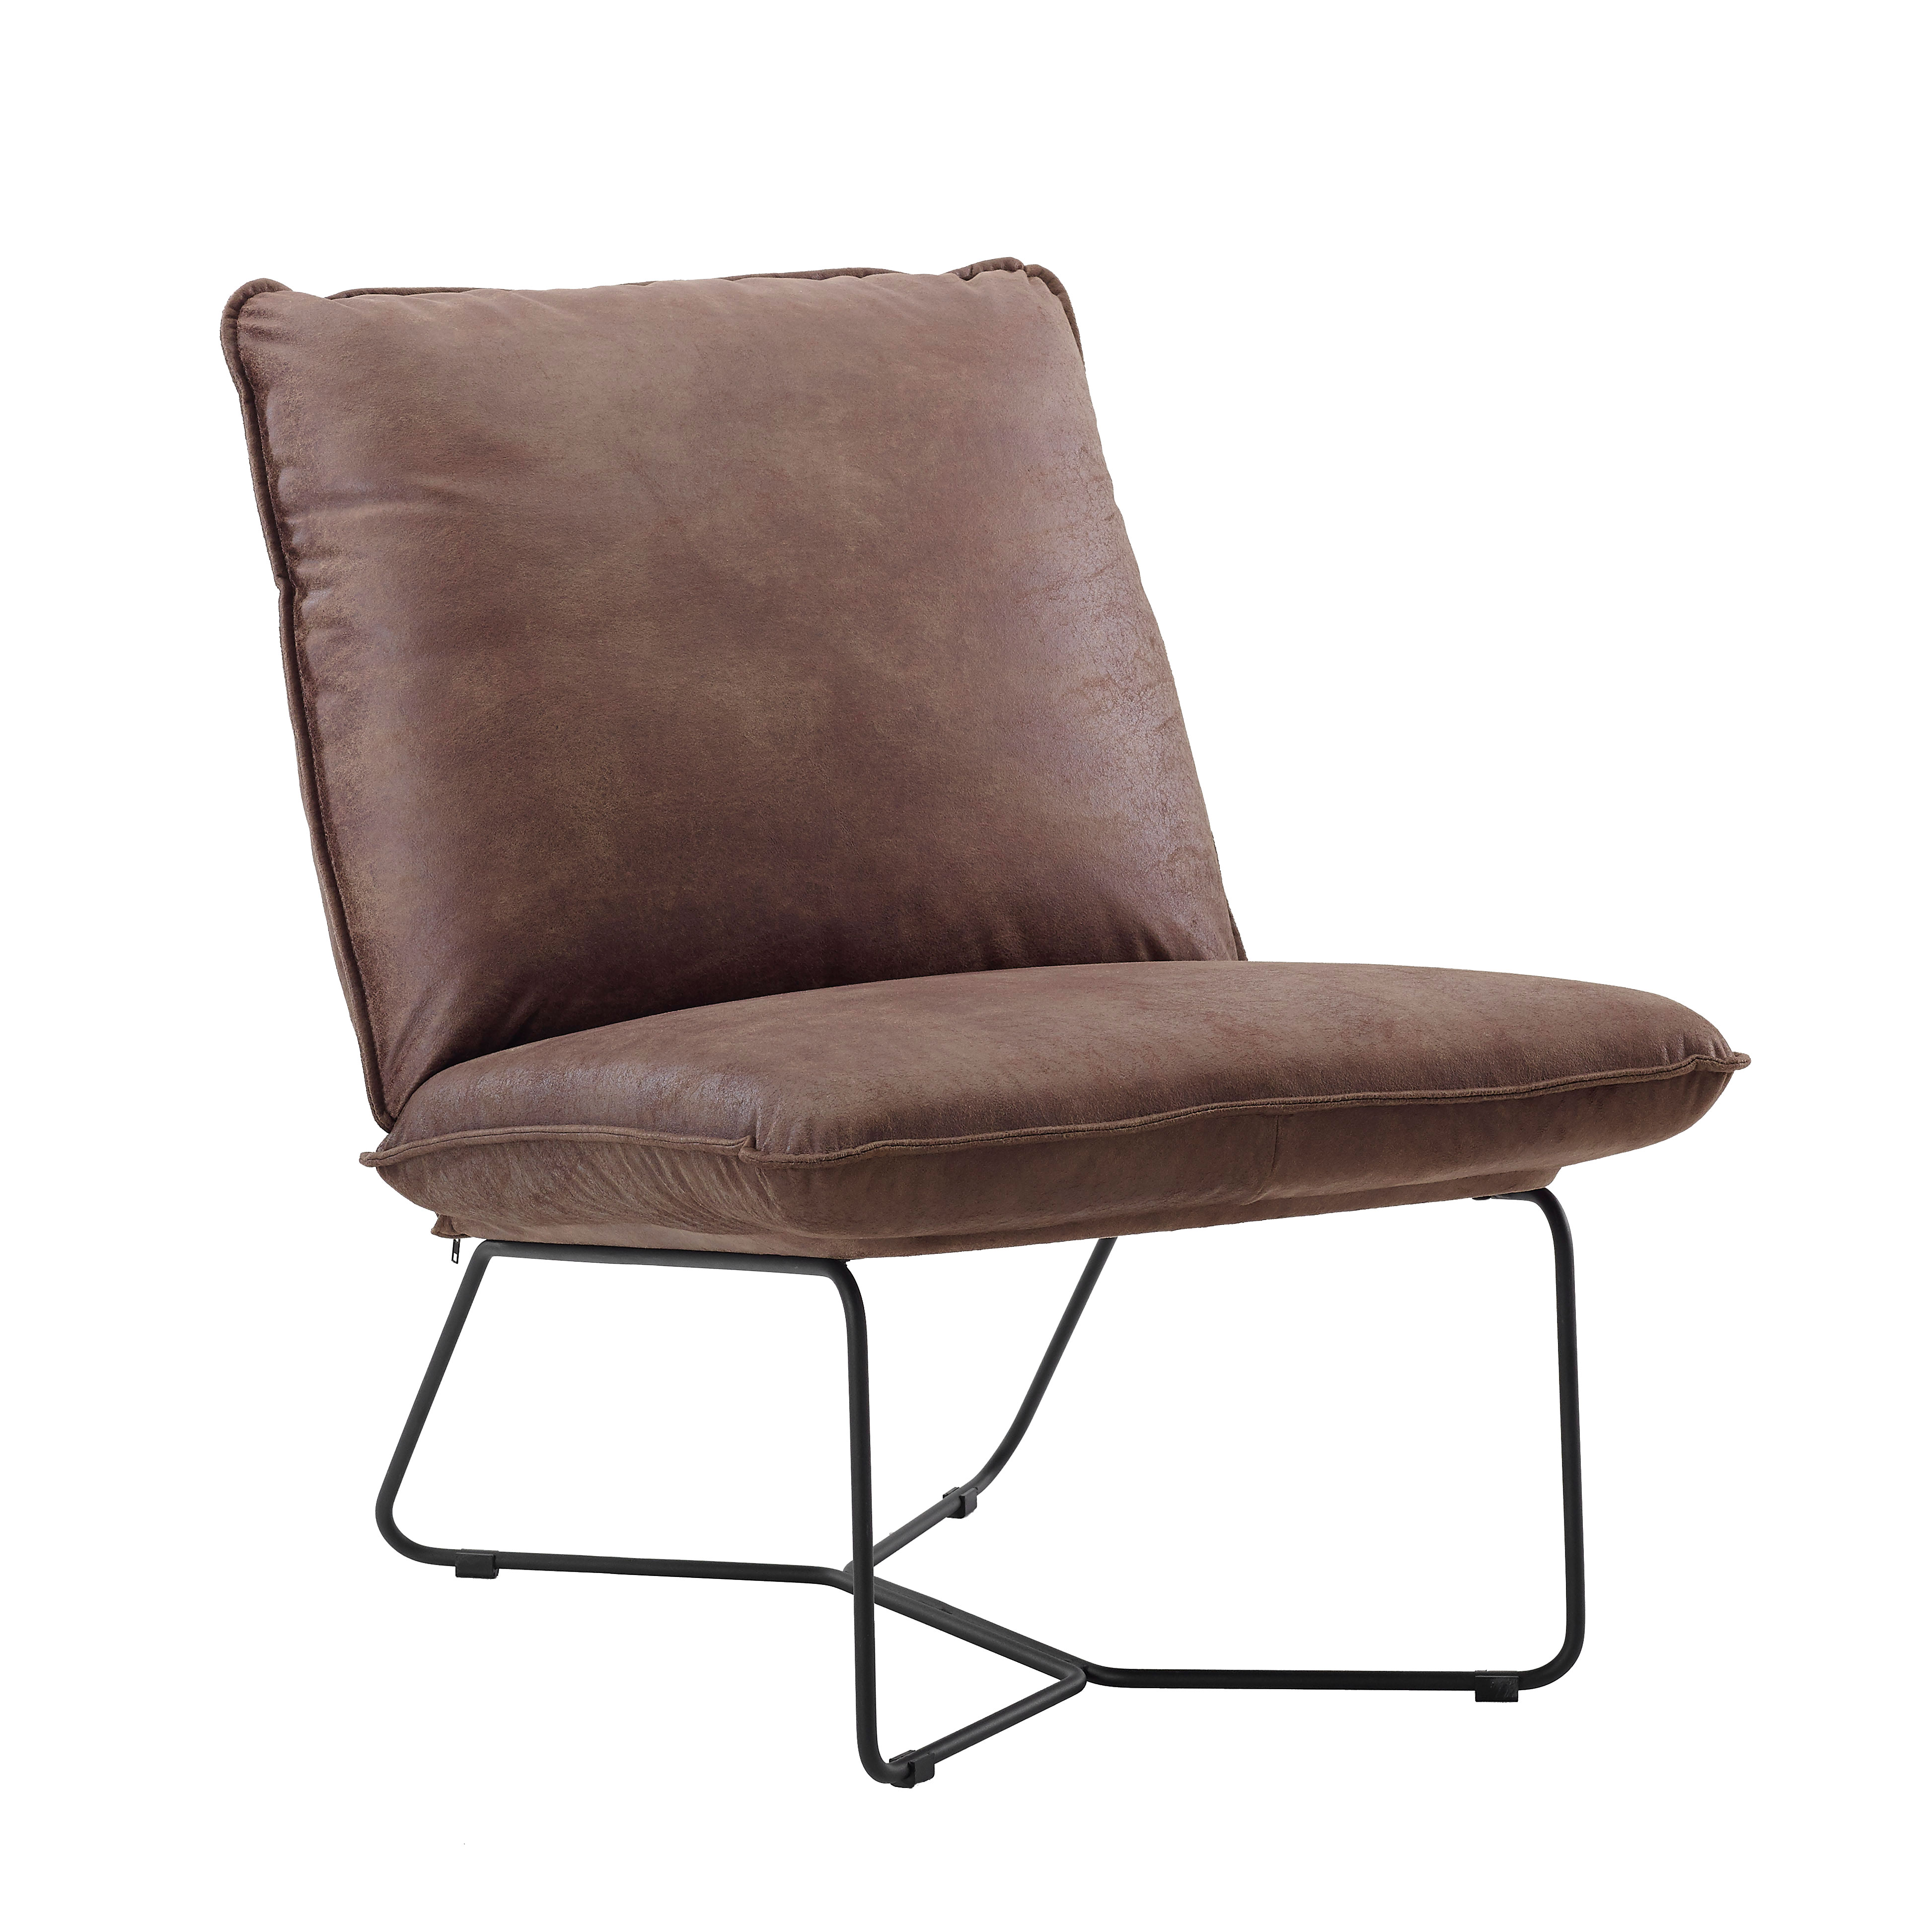 Better Homes & Gardens Pillow Lounge, Accent Chair, Brown Faux Leather Upholstery - image 5 of 9